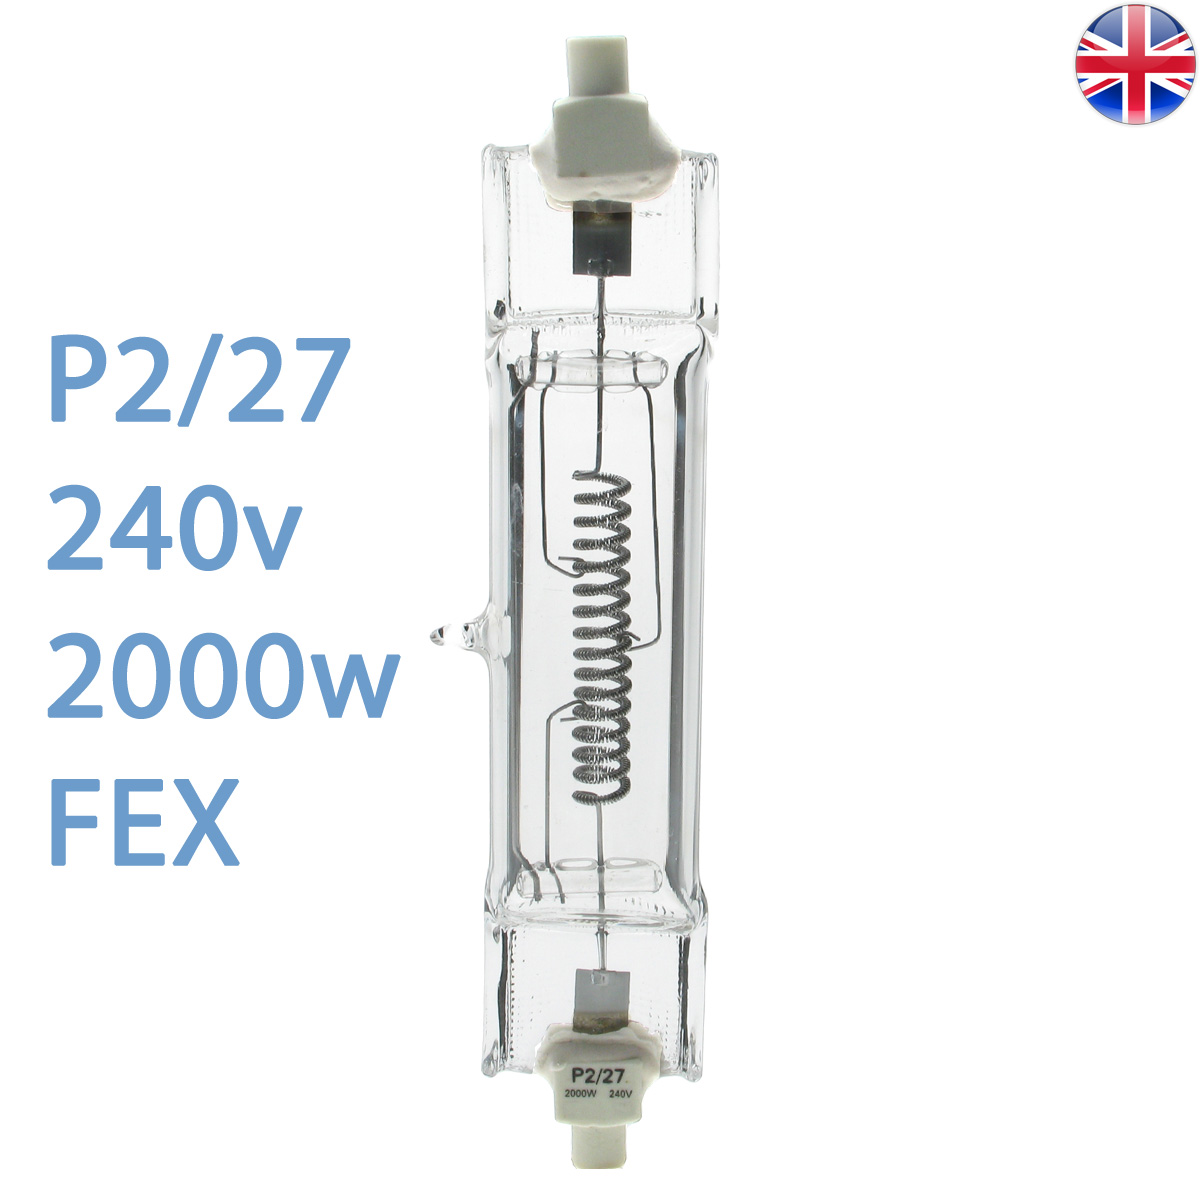 FEX P2/27 2000w Blonde Bulb 240v RX7s Photoluxe P2 27 2KW